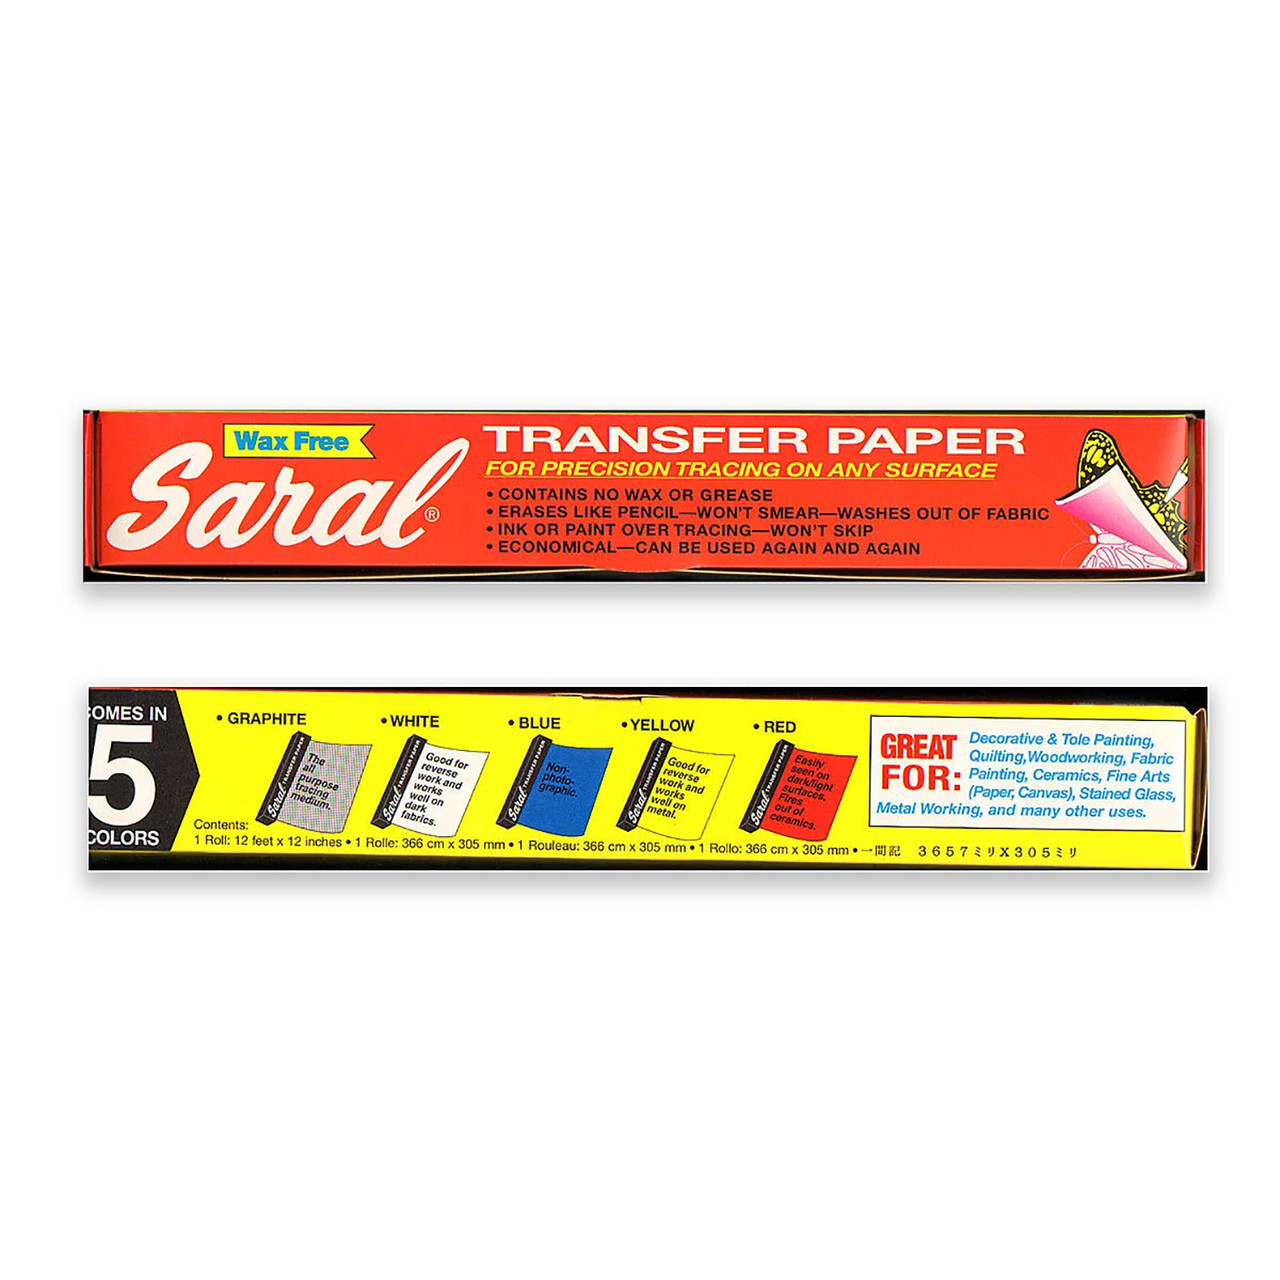 Saral Transfer paper - rol 31,6cmx3,66m - graphite - Schleiper - Complete  online catalogue